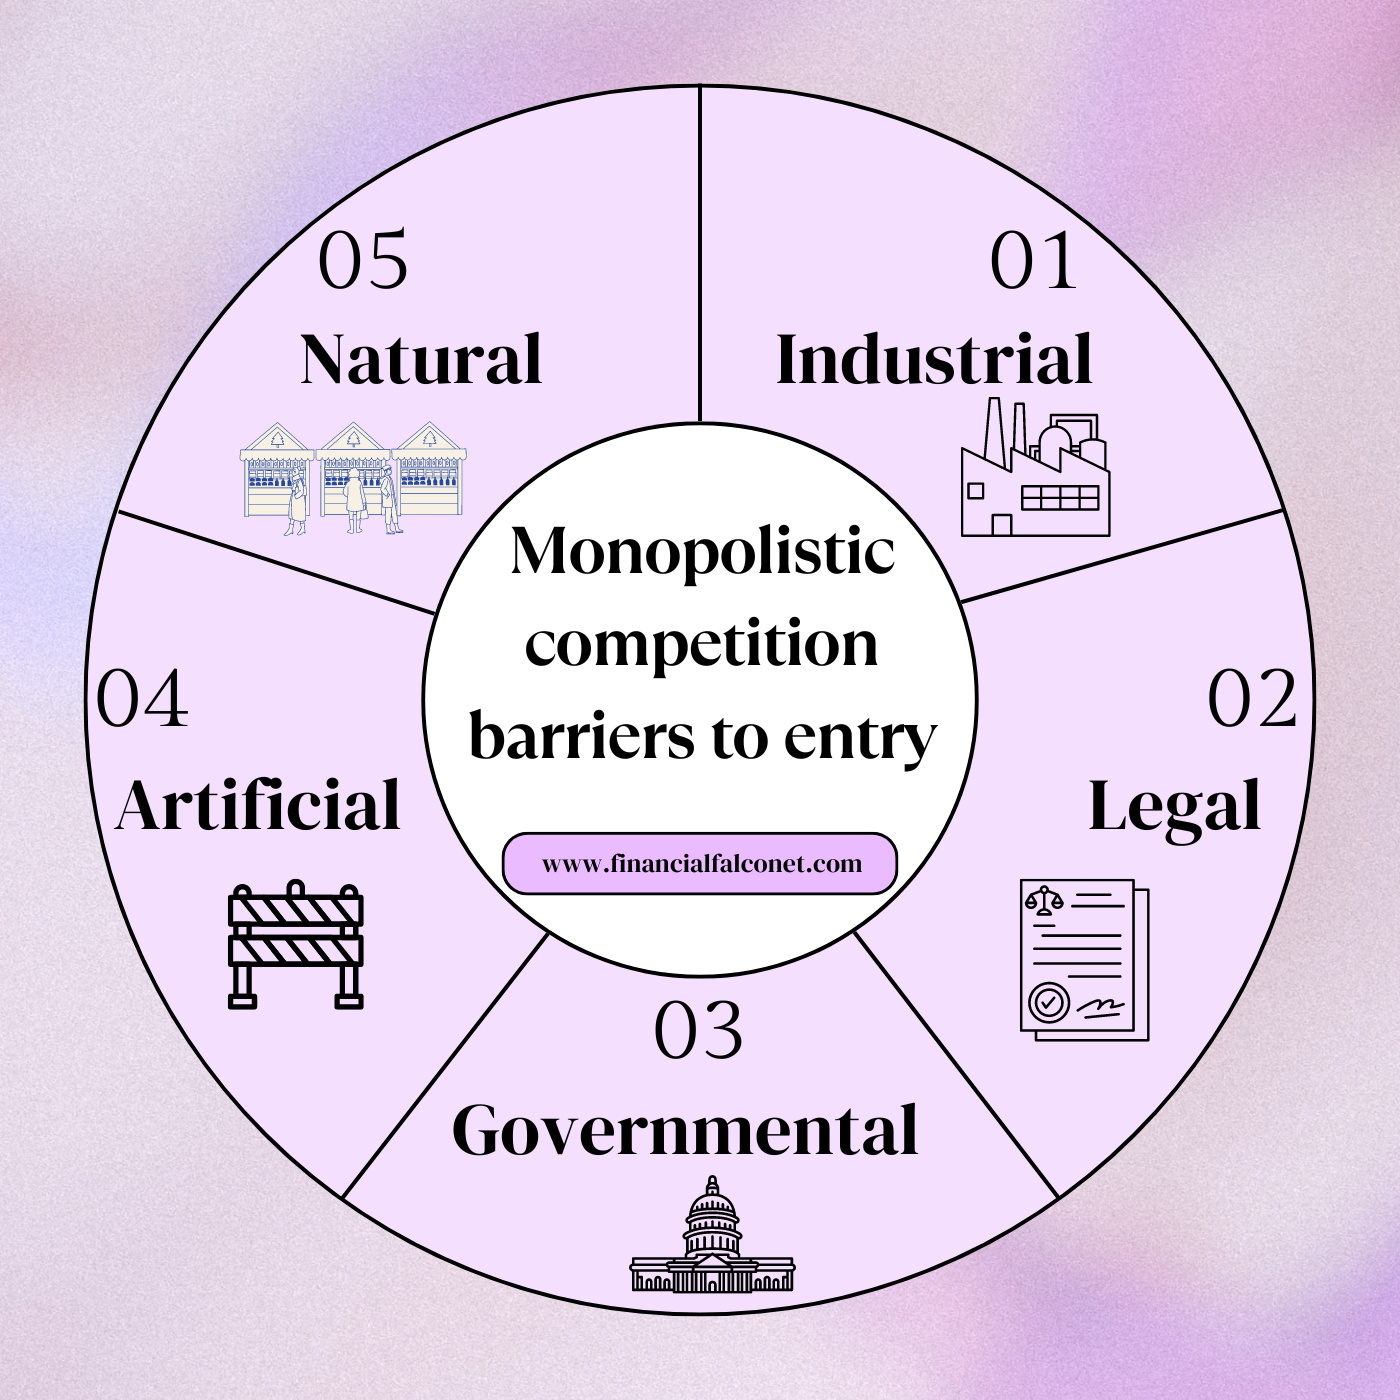 Monopolistic competition barriers to entry